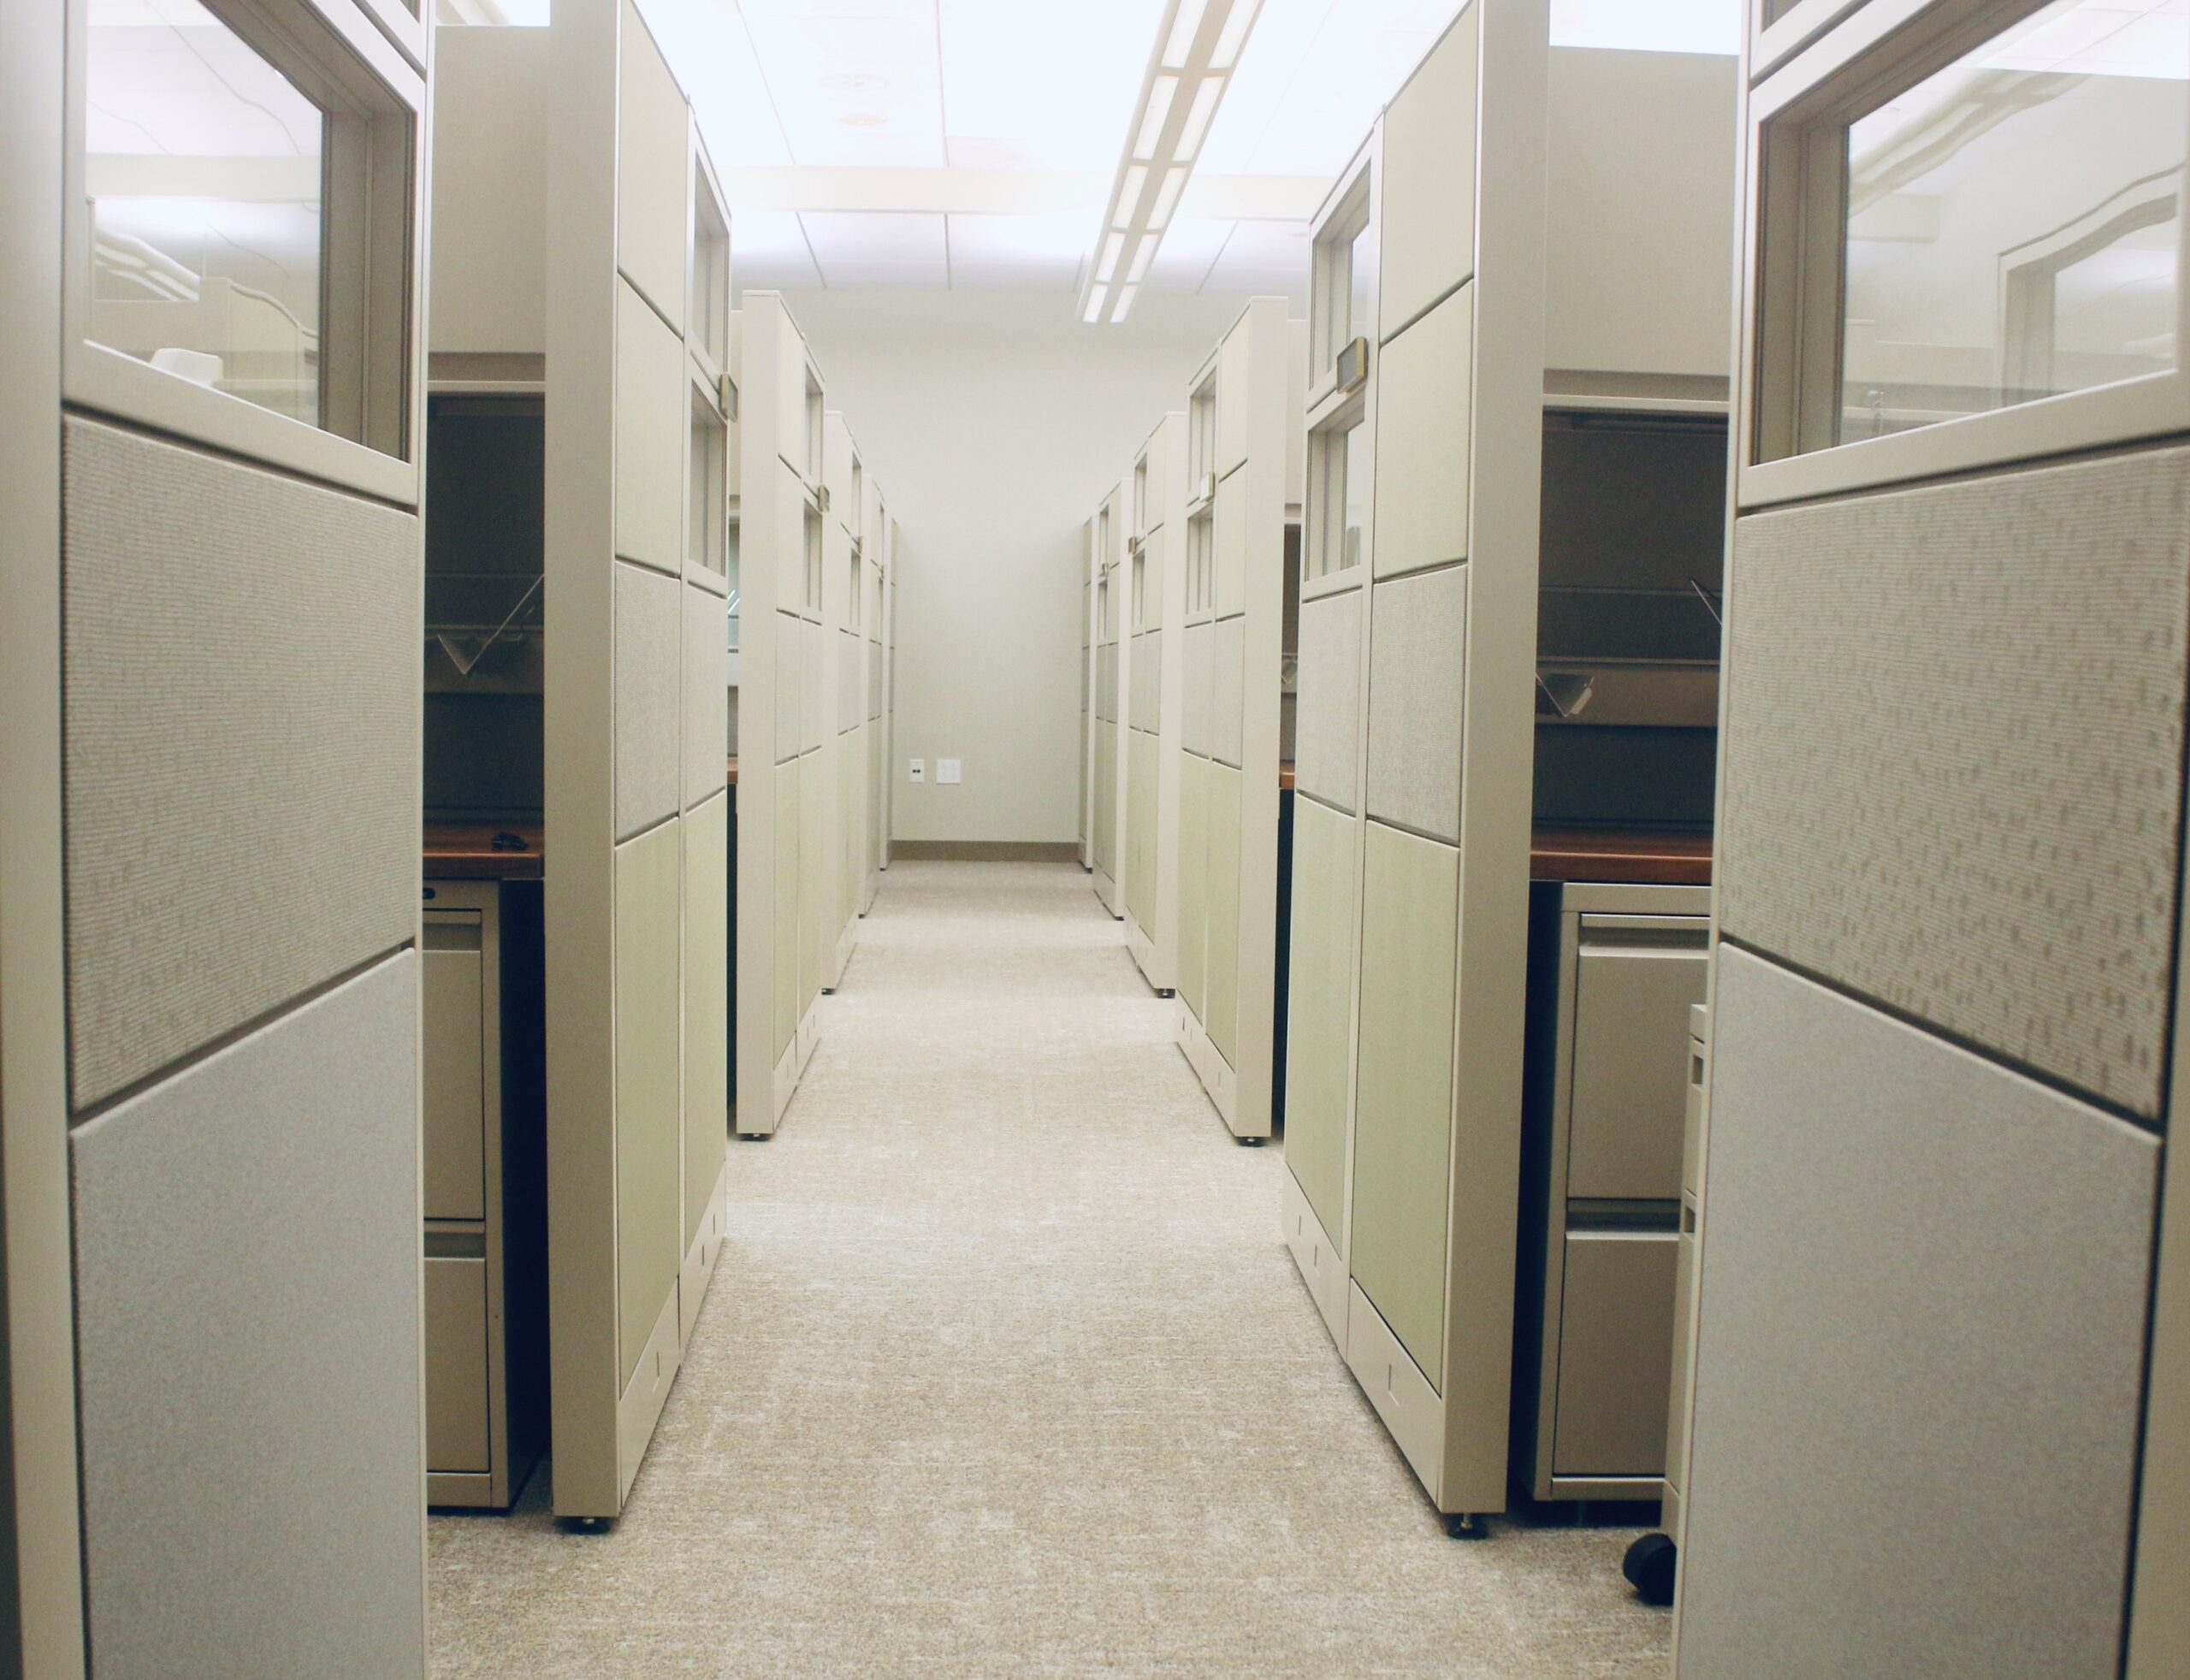 Rows of Cubicals